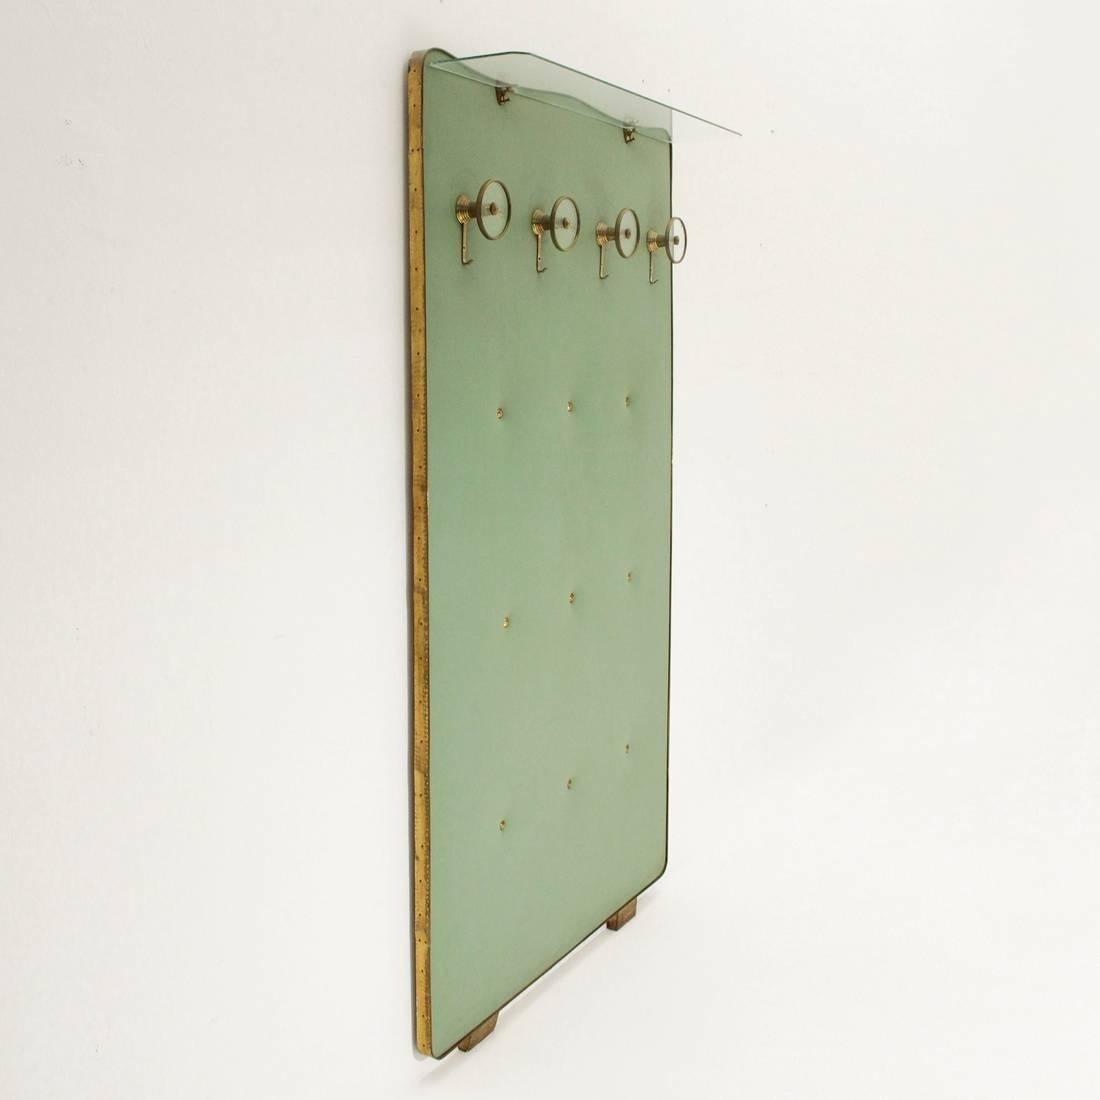 Italian charming entrance hanger from the 1950s.
Wood structure covered in green vinyl with brass studs.
Hangers and top shelf in brass and glass, side edge and legs in brass.
Good general conditions, normal signs due to time